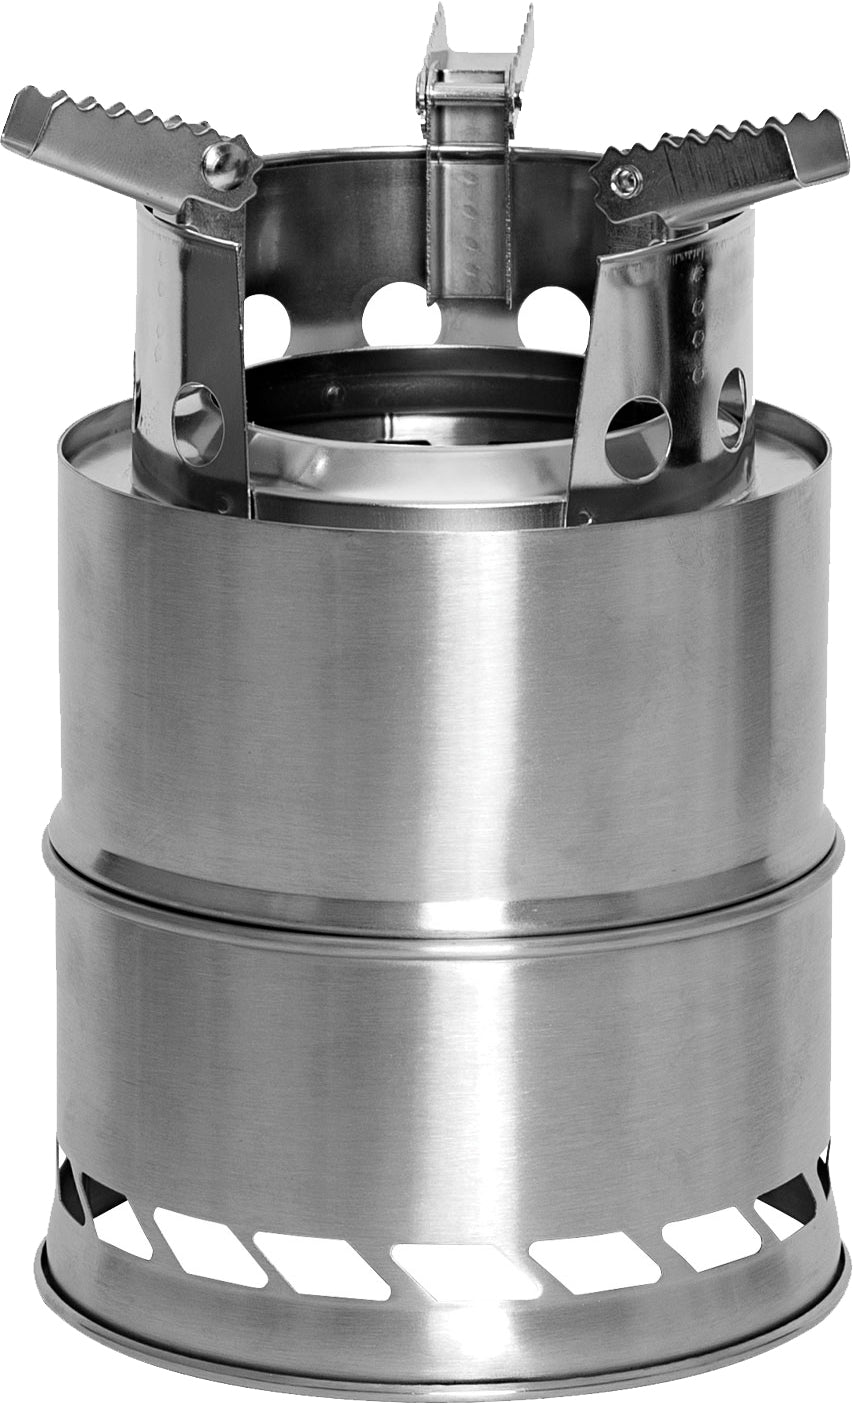 Stainless Steel Portable Camping / Backpacking Stove